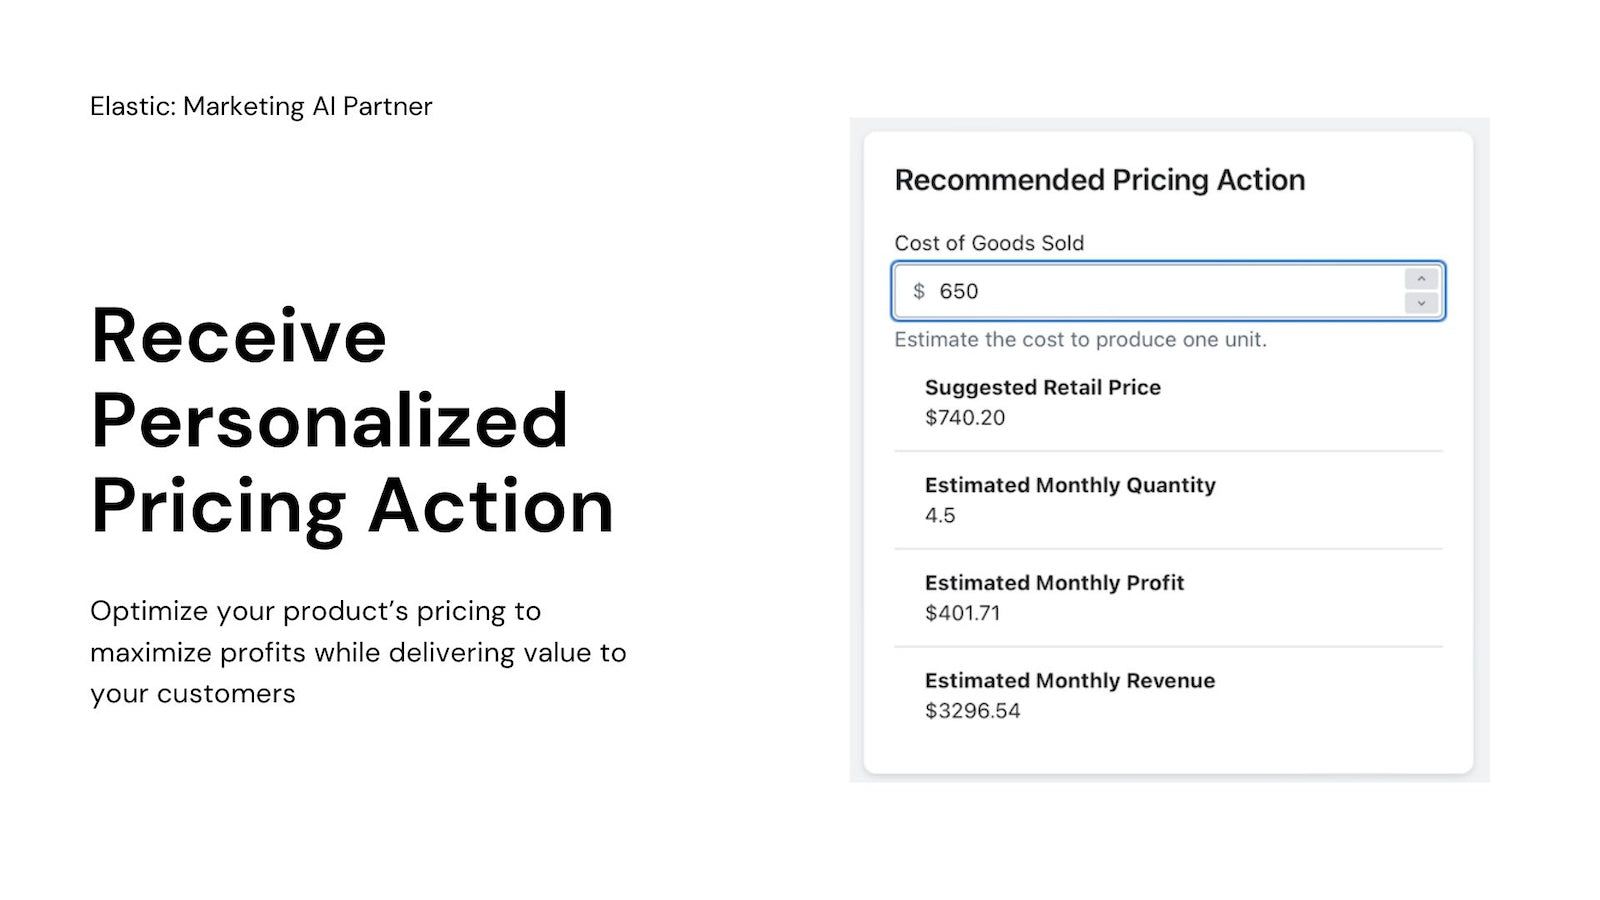 Receive Personalized Pricing Action